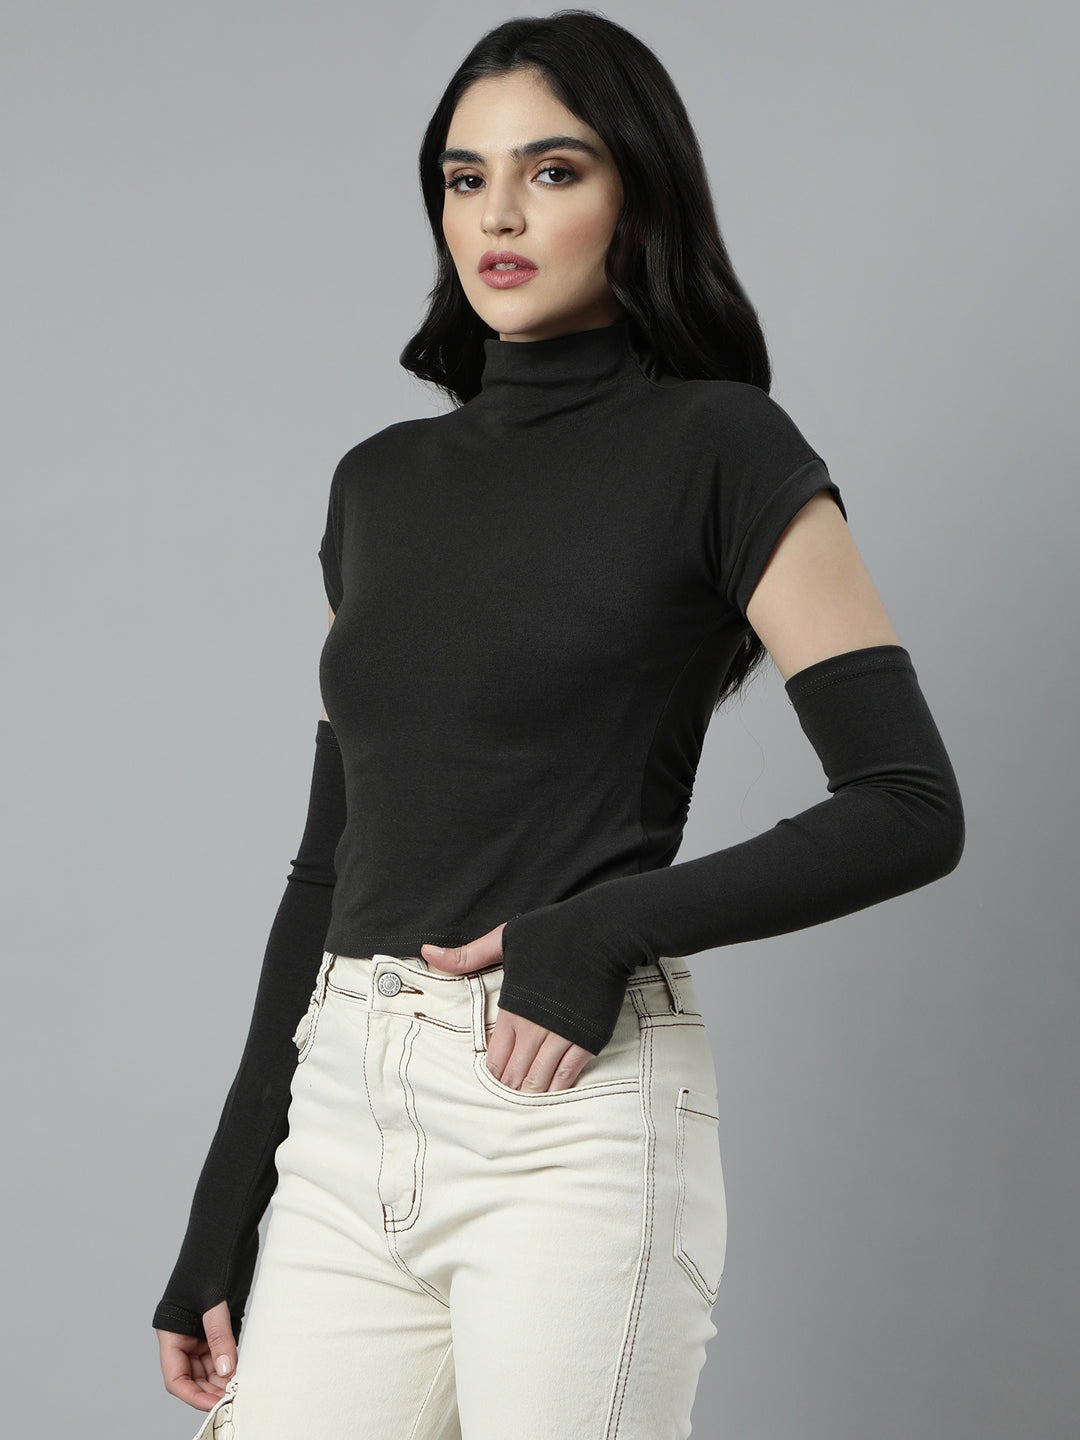 Women Solid Grey Styled Back Top comes with Detachable Sleeves